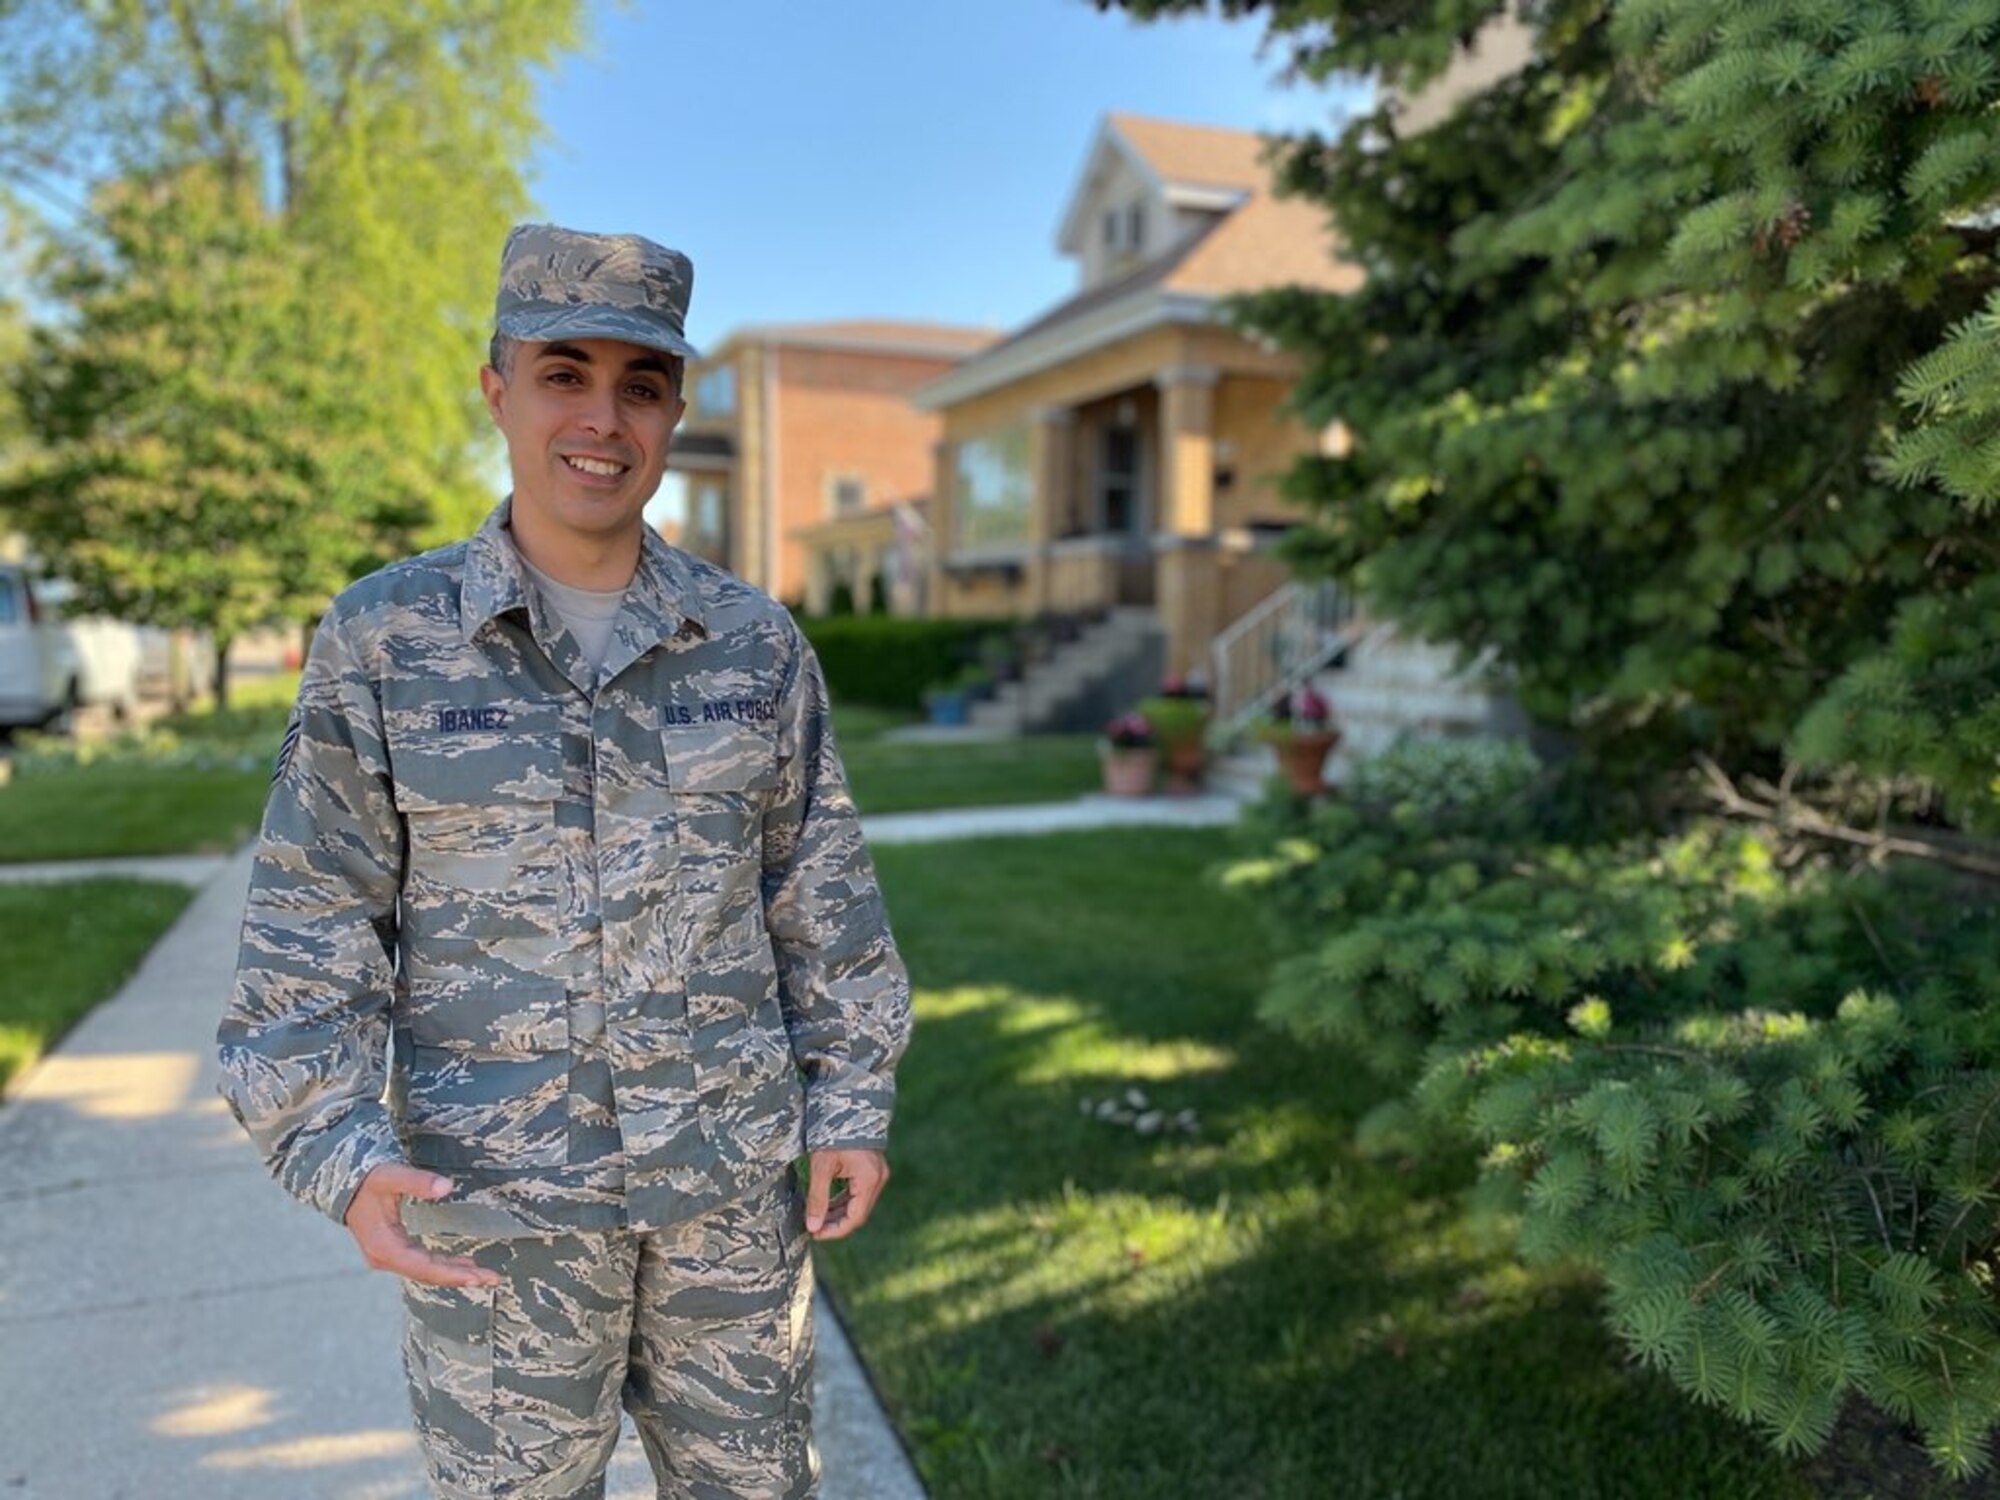 Tech. Sgt. Brandon Ibanez, a cyber intelligence analyst with the 854th Combat Operations Squadron, stands for a photo outside his home in Chicago, Illinois, June 15, 2020. Ibanez’s role in his unit requires him to analyze intelligence and triangulate technical, geographical and operational information to provide situational awareness for leadership. (Courtesy photo by Anna Czekaj)